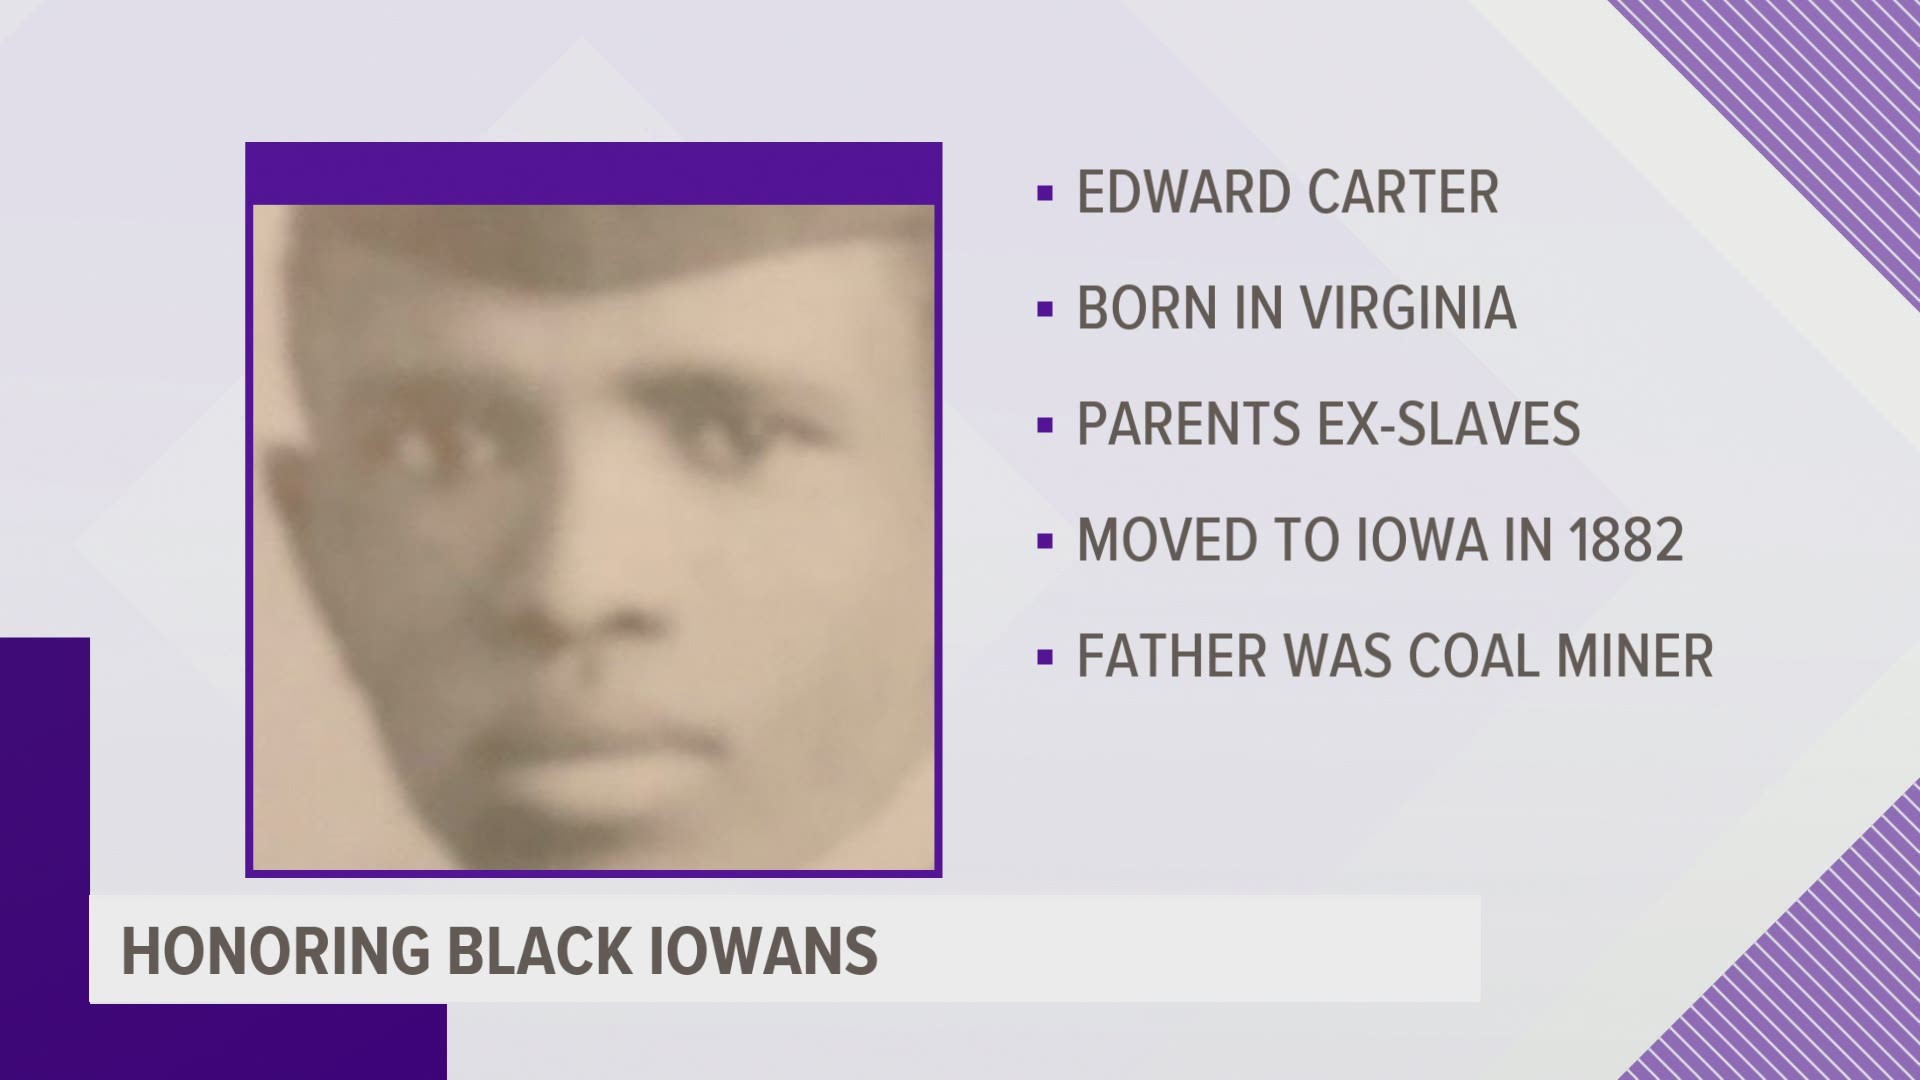 Carter was born in Virginia, the son of two ex-slaves. His family moved to Iowa in 1882 where his father worked as a coal miner.